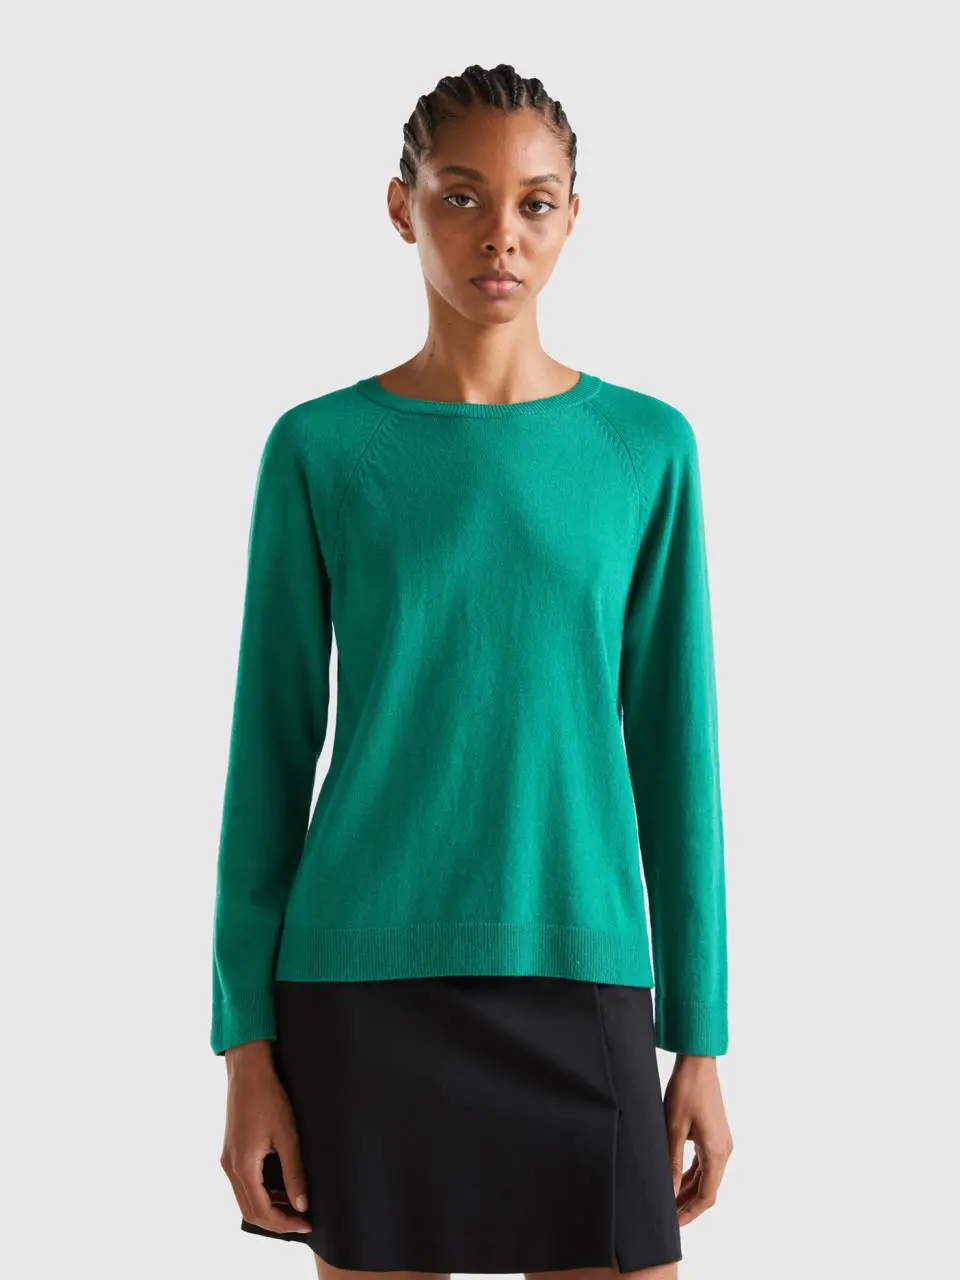 Benetton forest green crew neck sweater in cashmere and wool blend. 1